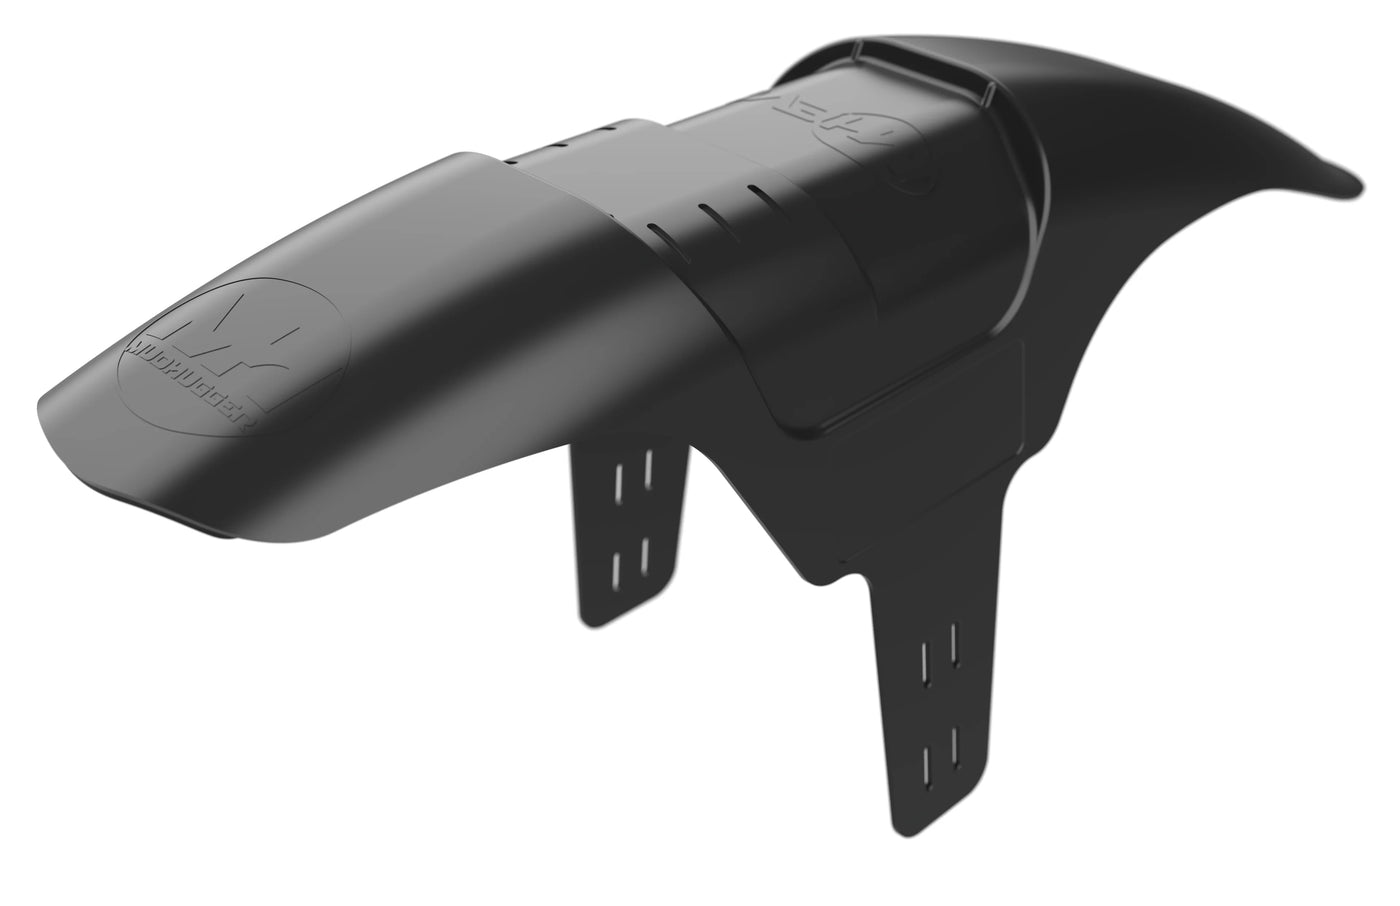 Mudhugger EVO Mudguard Front - Multiple Types and Sizes, Easy Fitment